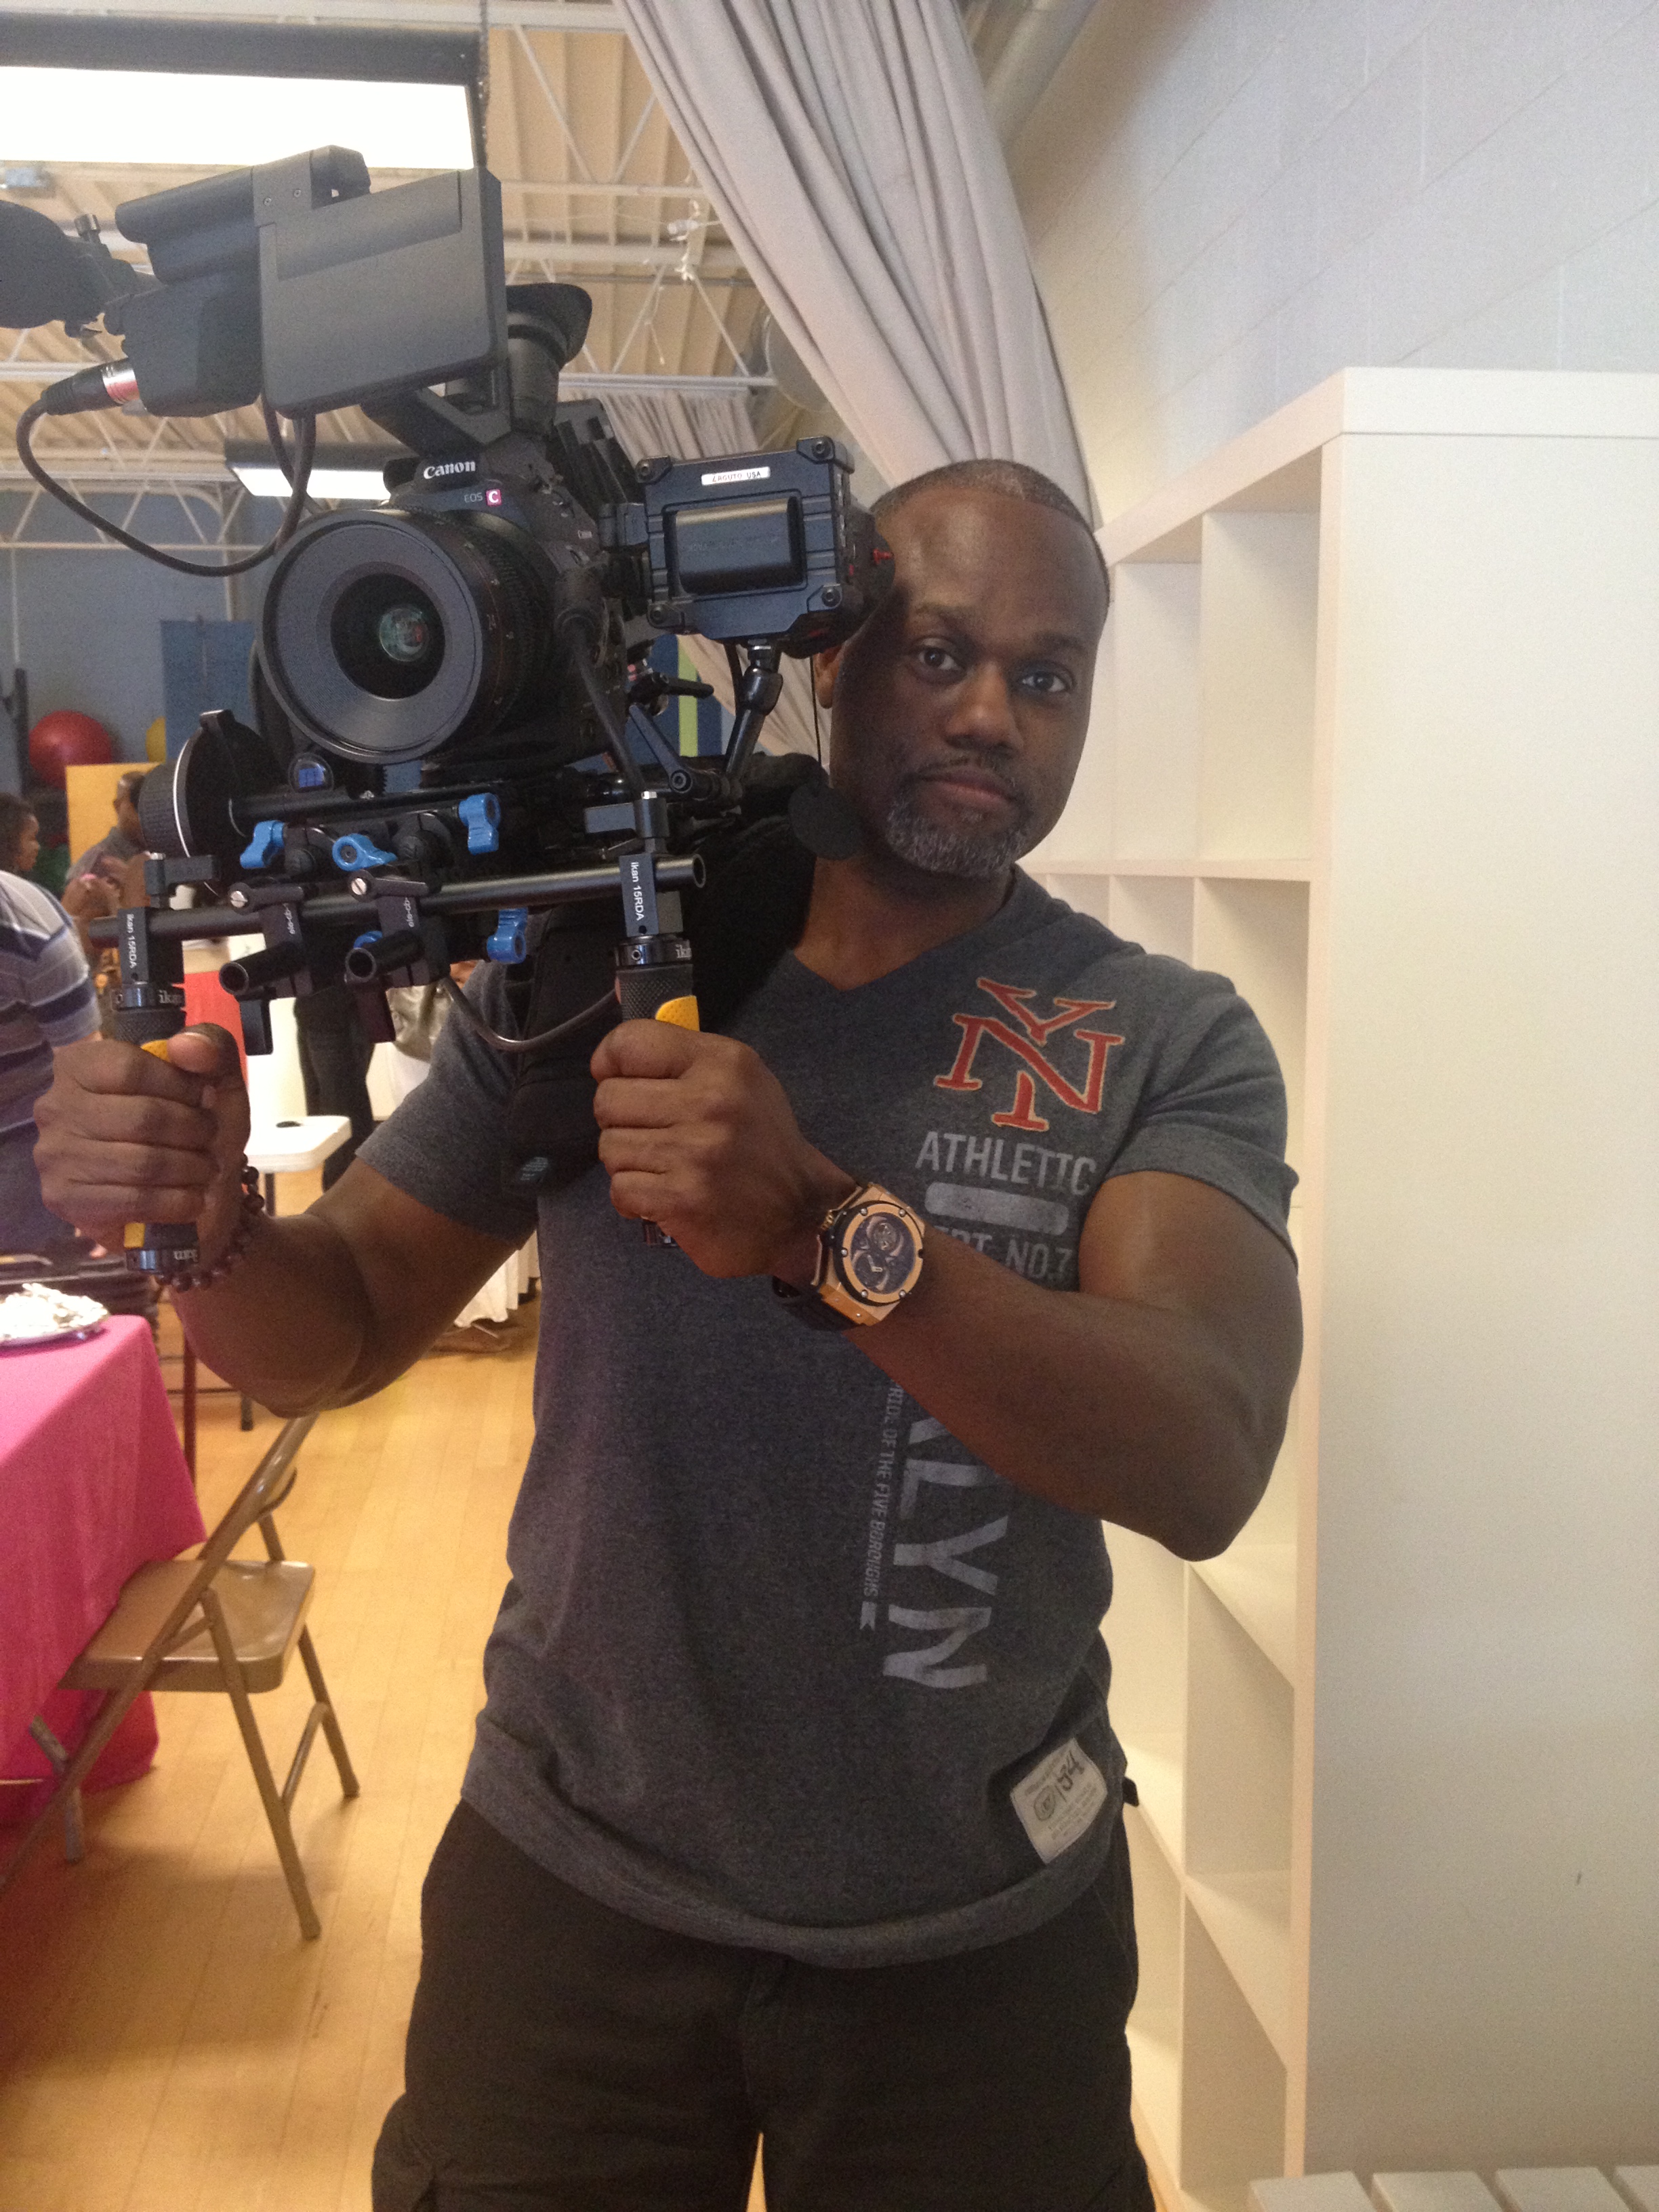 On set with the monster cam: The Canon C300 (Rigged Out)!!!